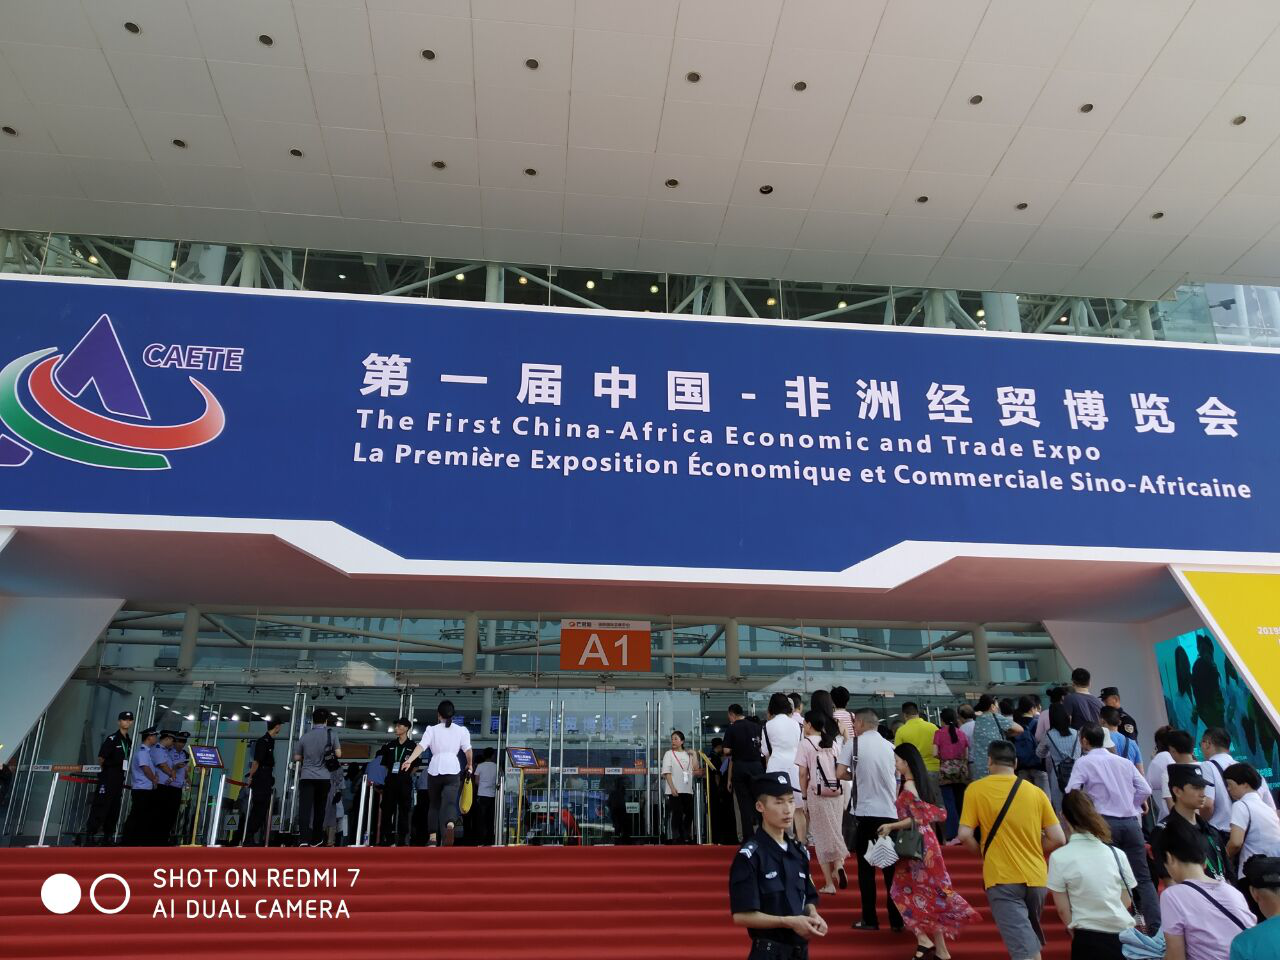 The First China-Africa Economic and Trade Expo